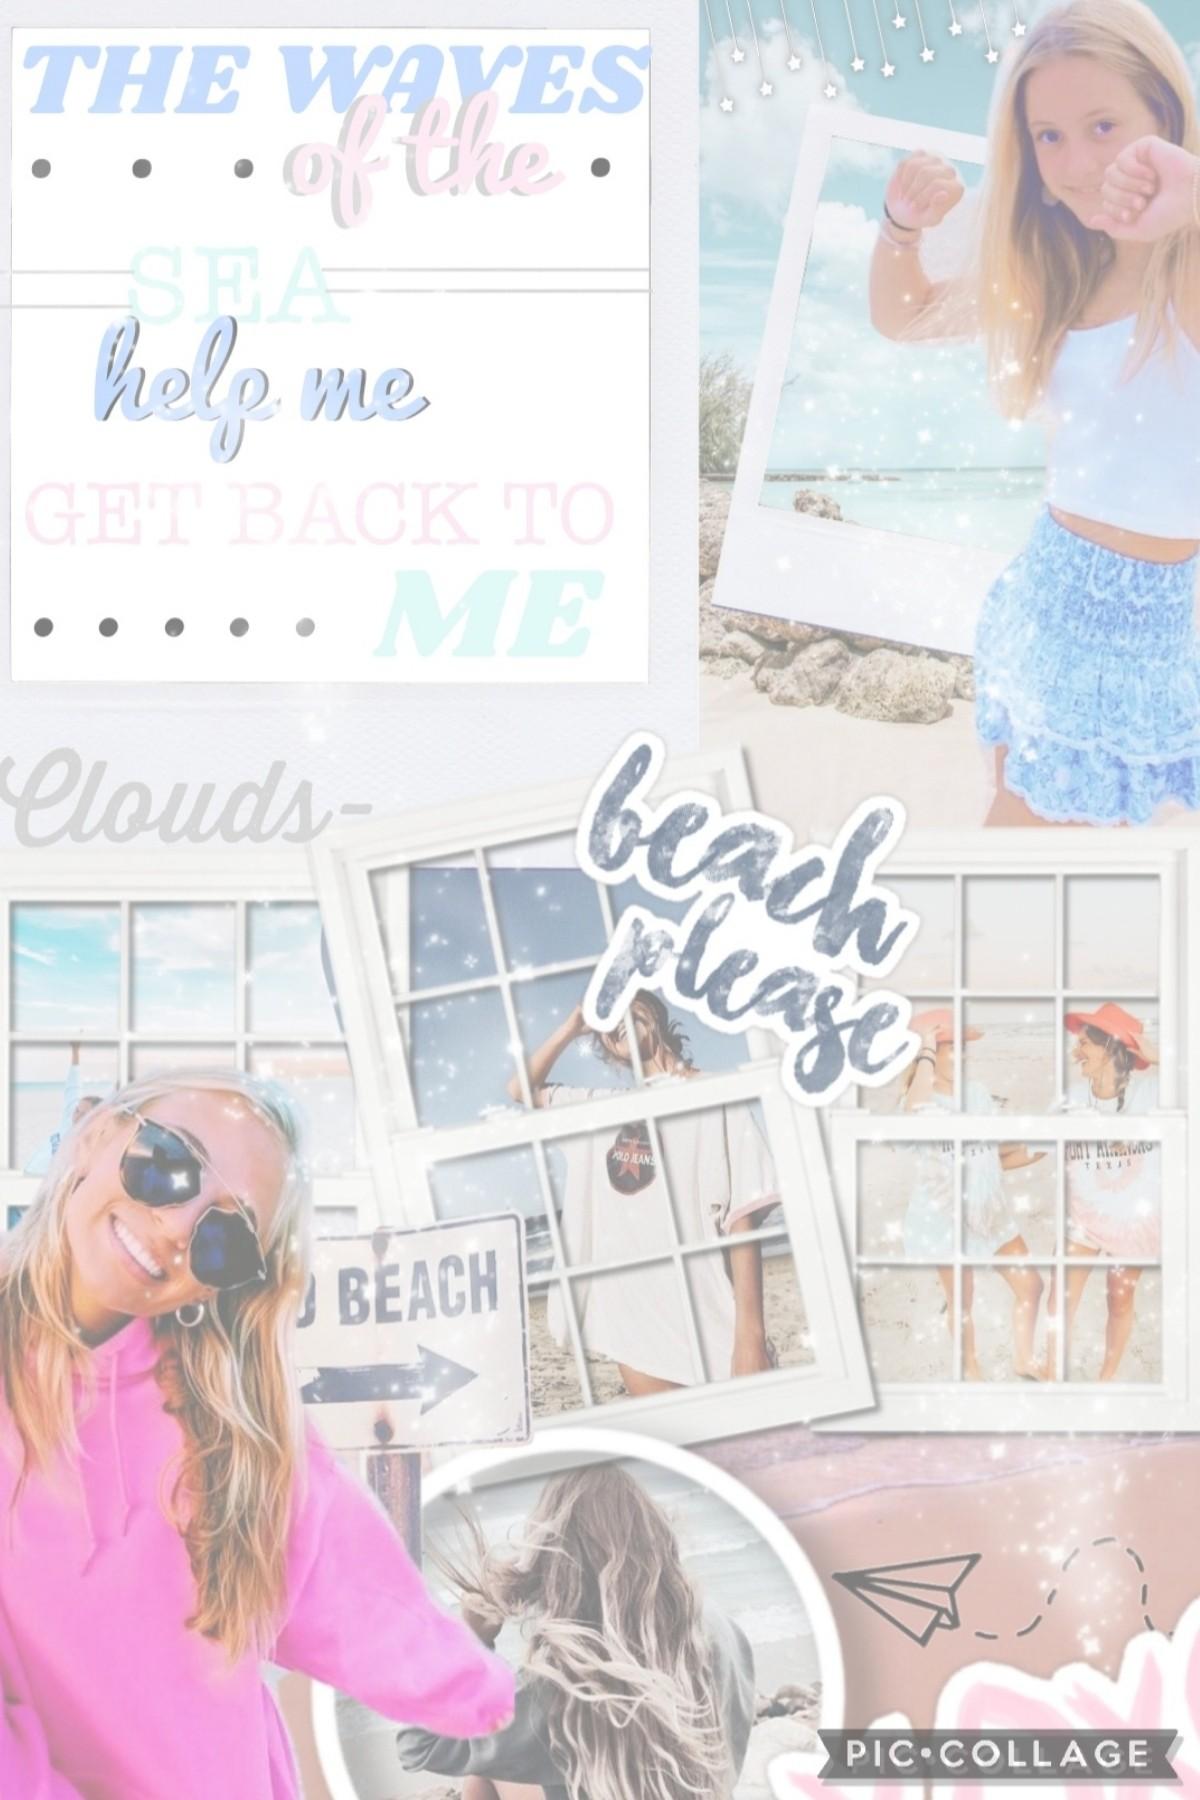              ✨️ tap ✨️

💓 heyy! so I tried to so a preppy + beachy collage, similar to my other recent collages! 💖 tell me your thoughts on this one! i somehow dont like it...💭 
    SHOUTOUT: Go & follow -blight- they are close to 100 followers! 🤩
   QOTD